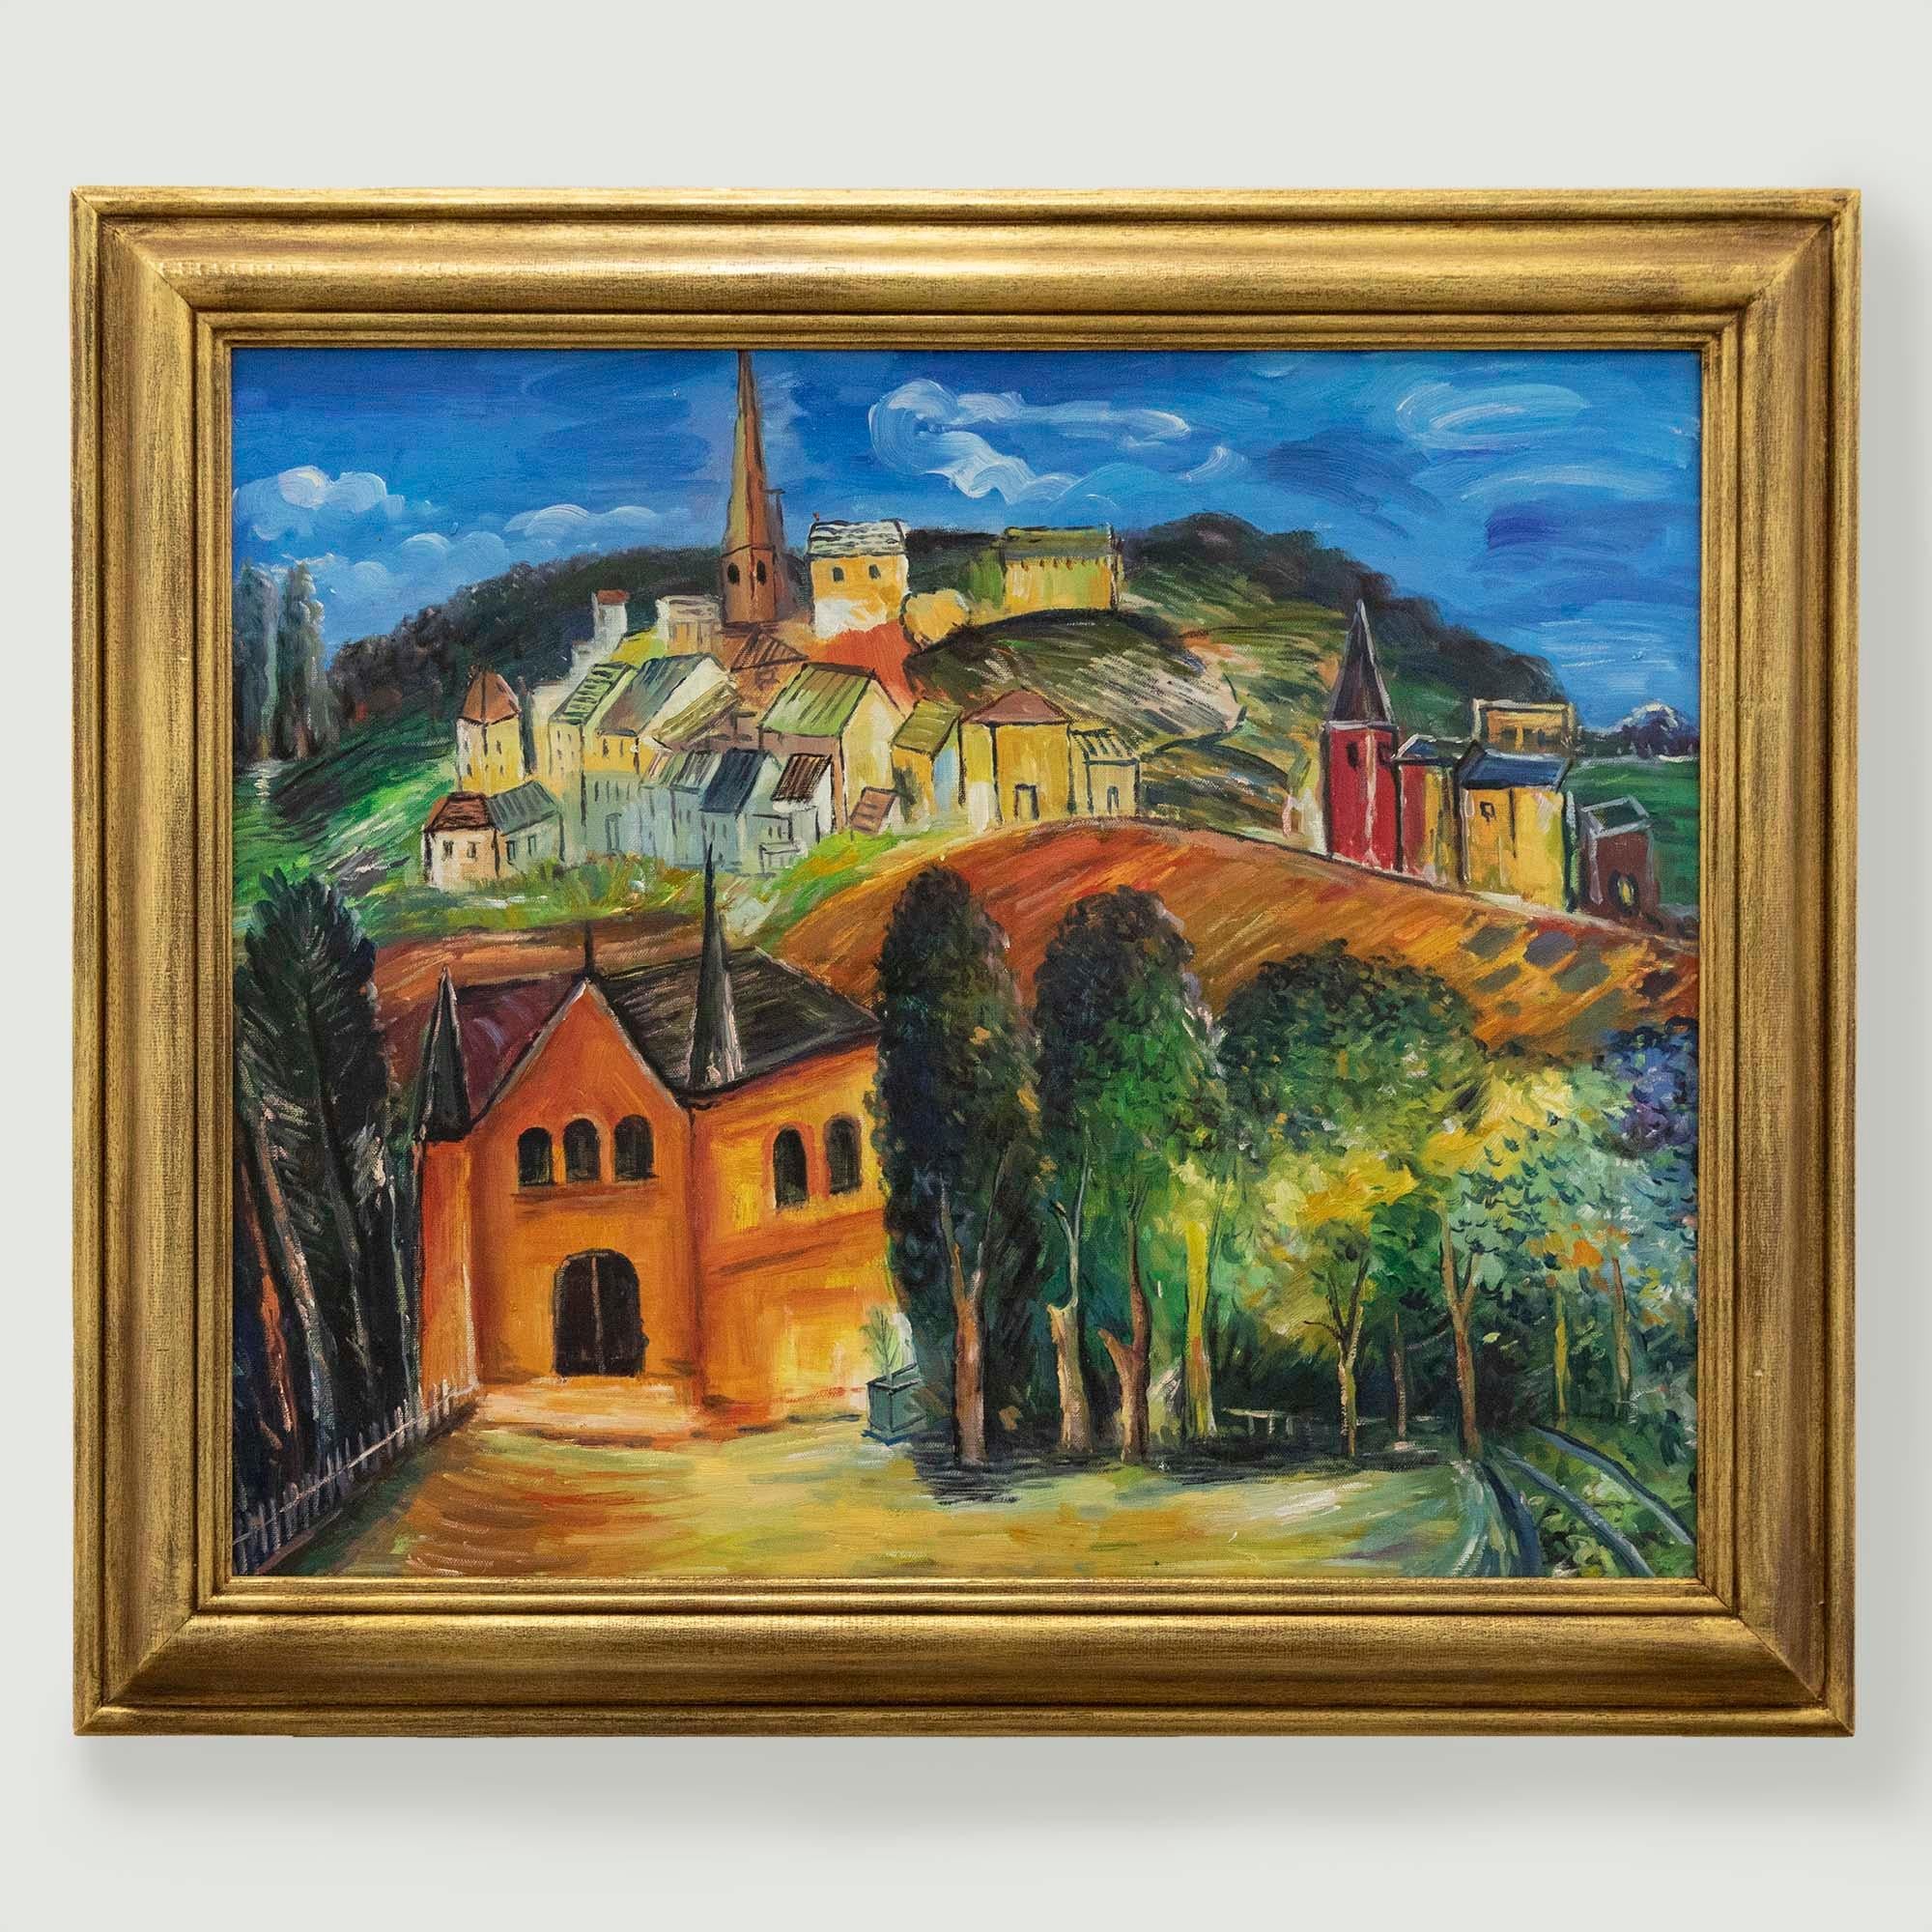 A delightfully vibrant study depicting a continental village in on a hilltop. The artist starts our viewpoint with a quaint church at the bottom of the hill and draws the eyeline to the colourful dwellings in the distance. Using expressive brushwork